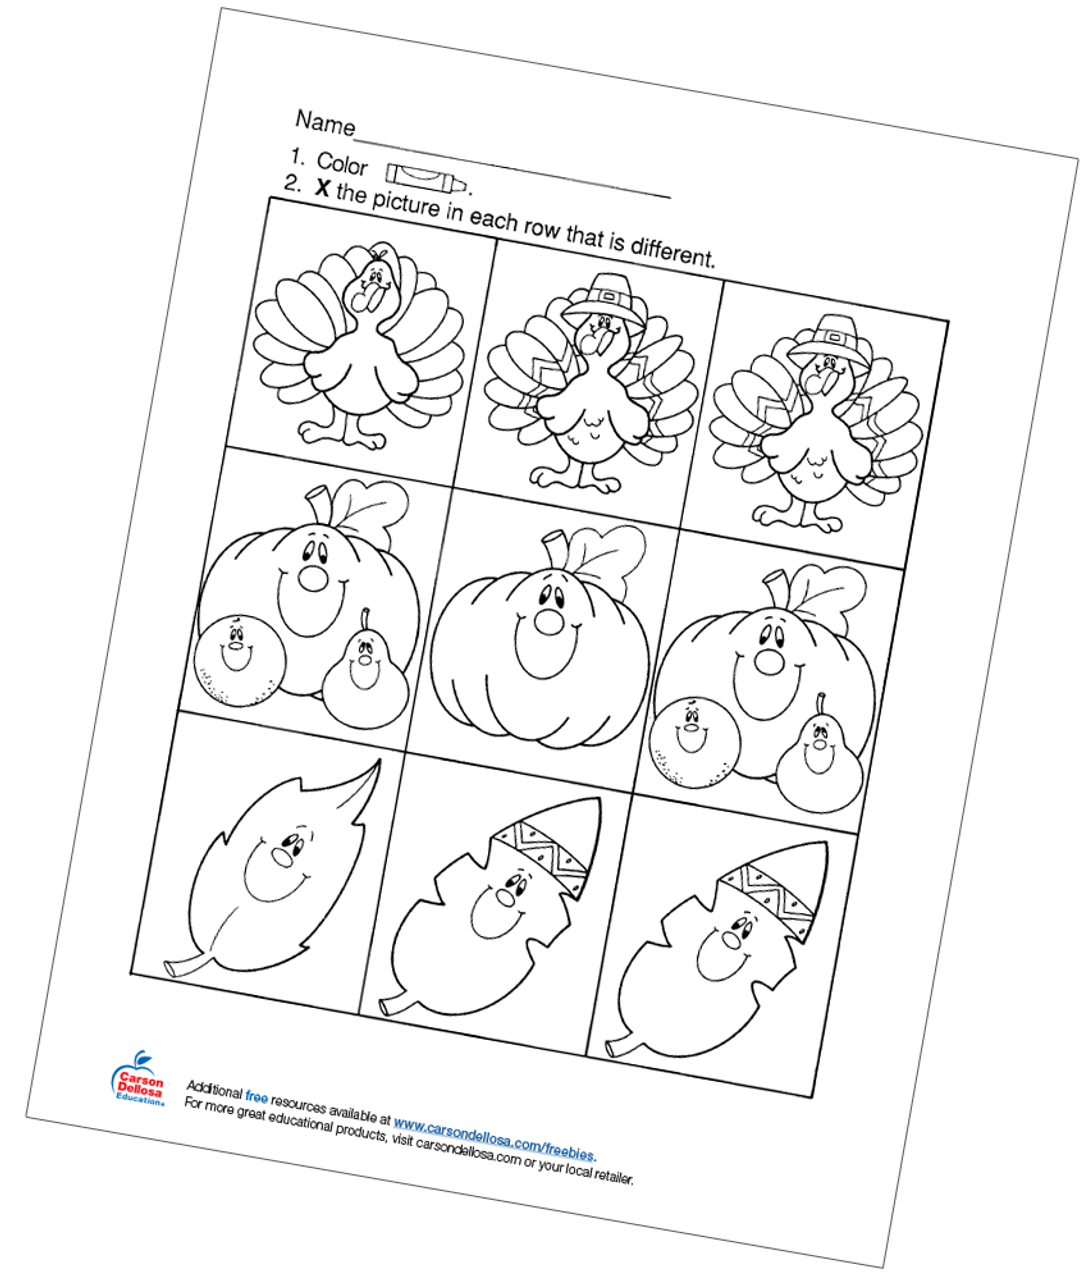 spot-the-difference-one-worksheet-free-printable-worksheets